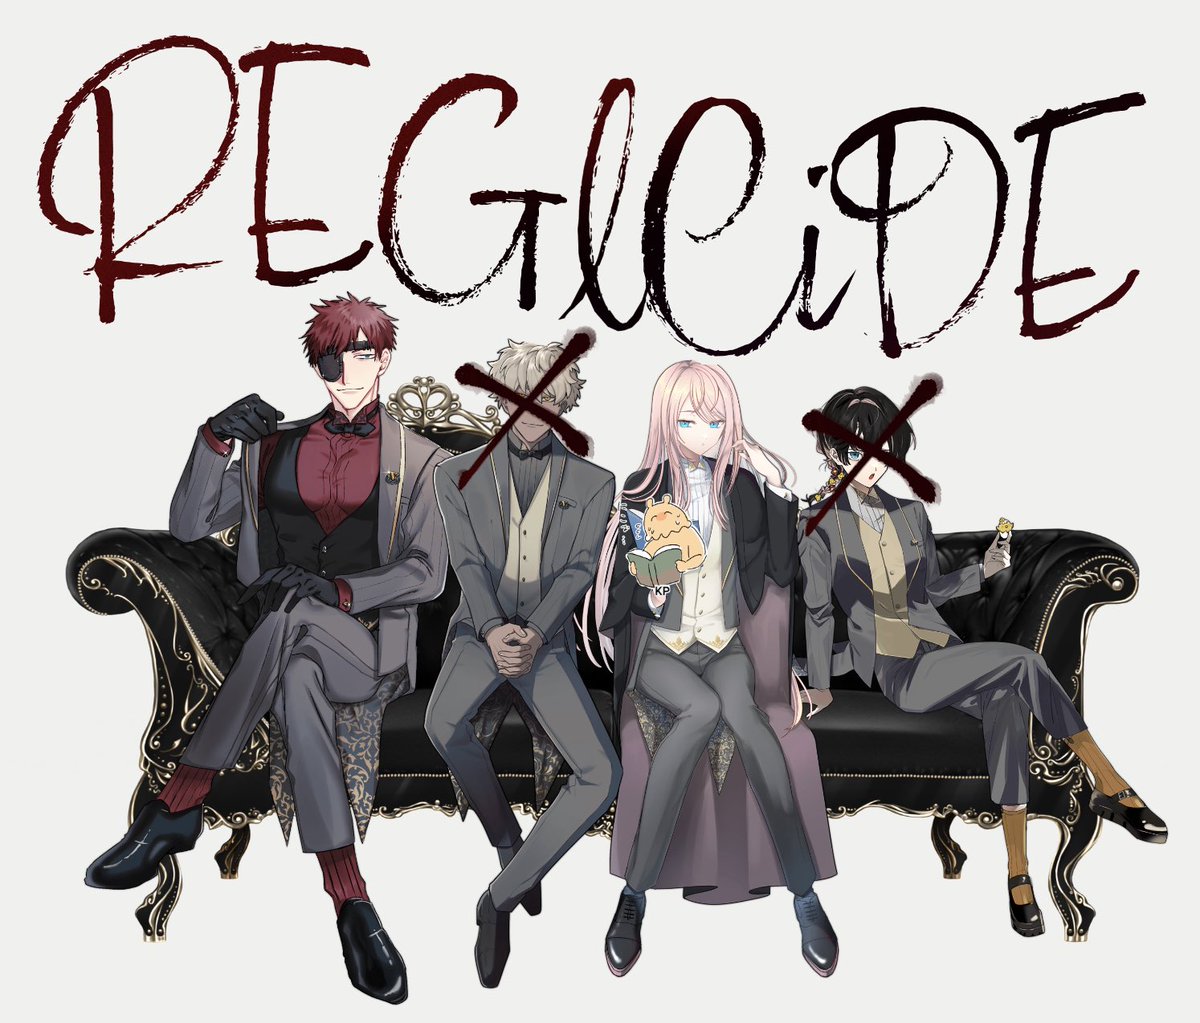 「CoC『 REGlCiDE-レジサイド- 』KP うだびさんHO1 Gilber」|耳 地@5月後半納品受付中のイラスト